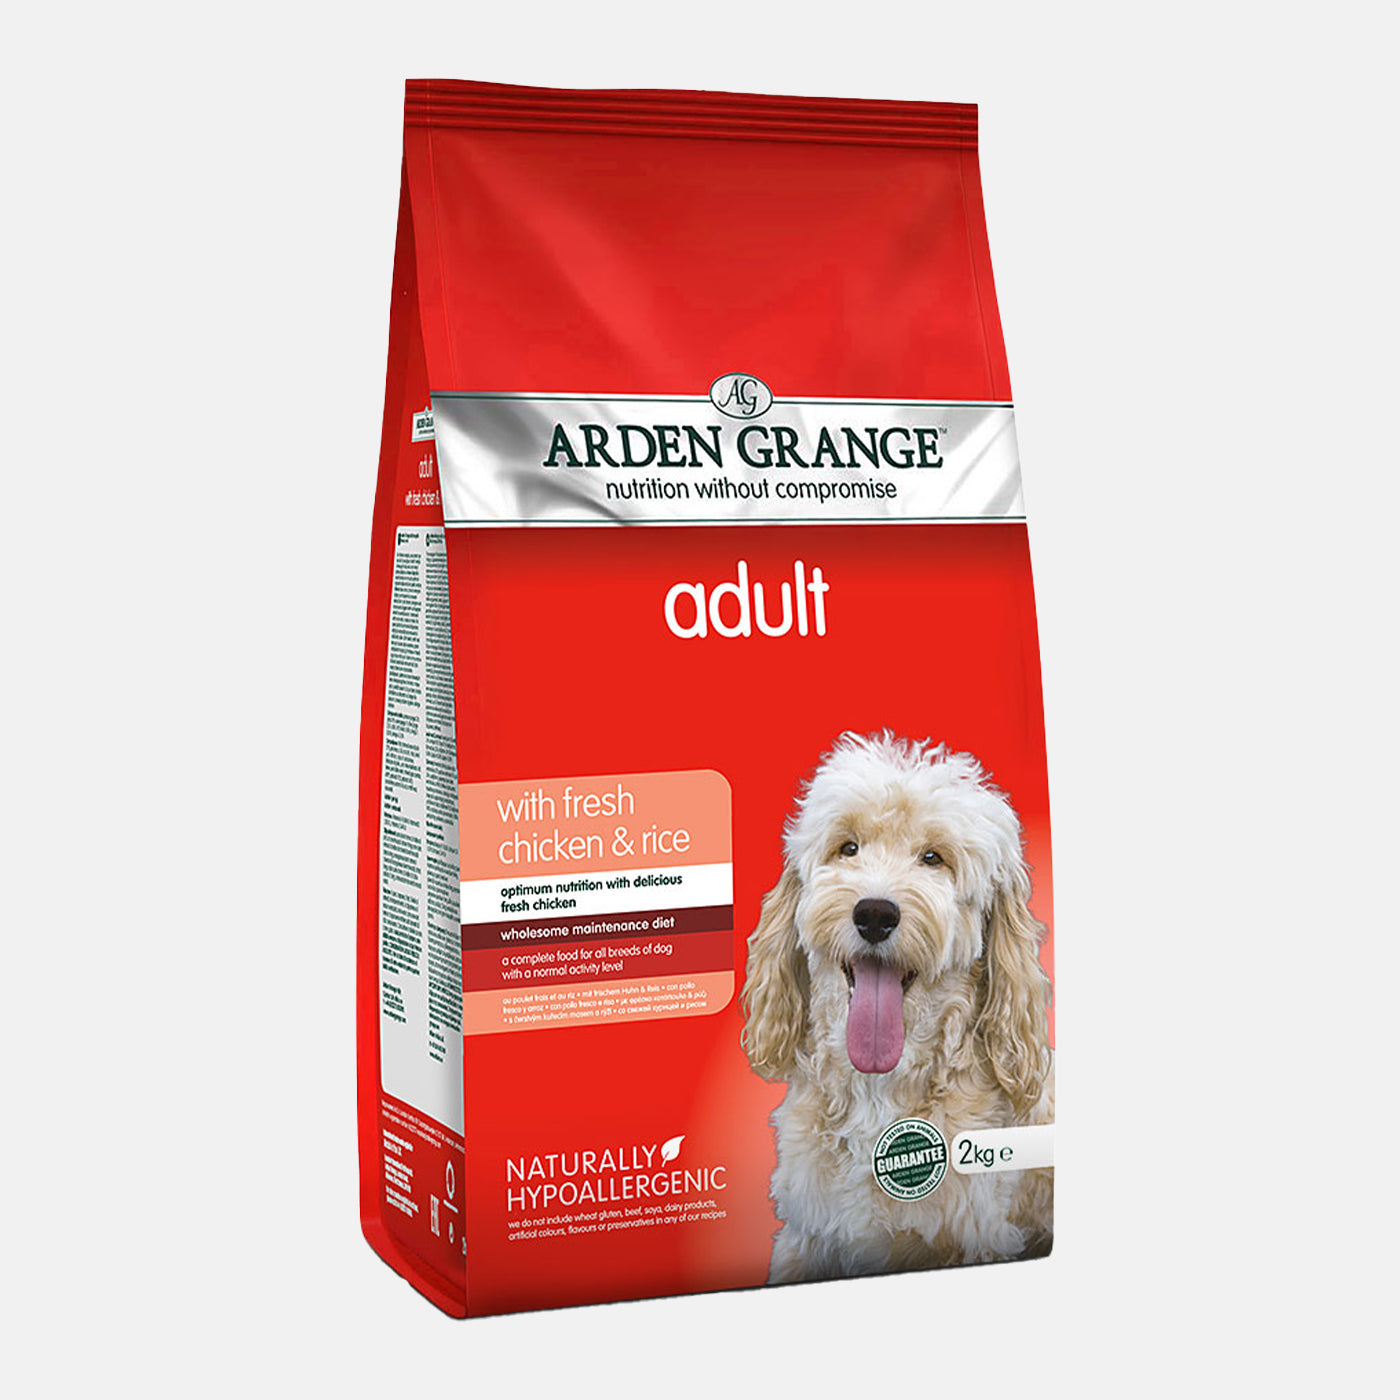 Arden Grange Adult Dry Dog Food with Chicken & Rice